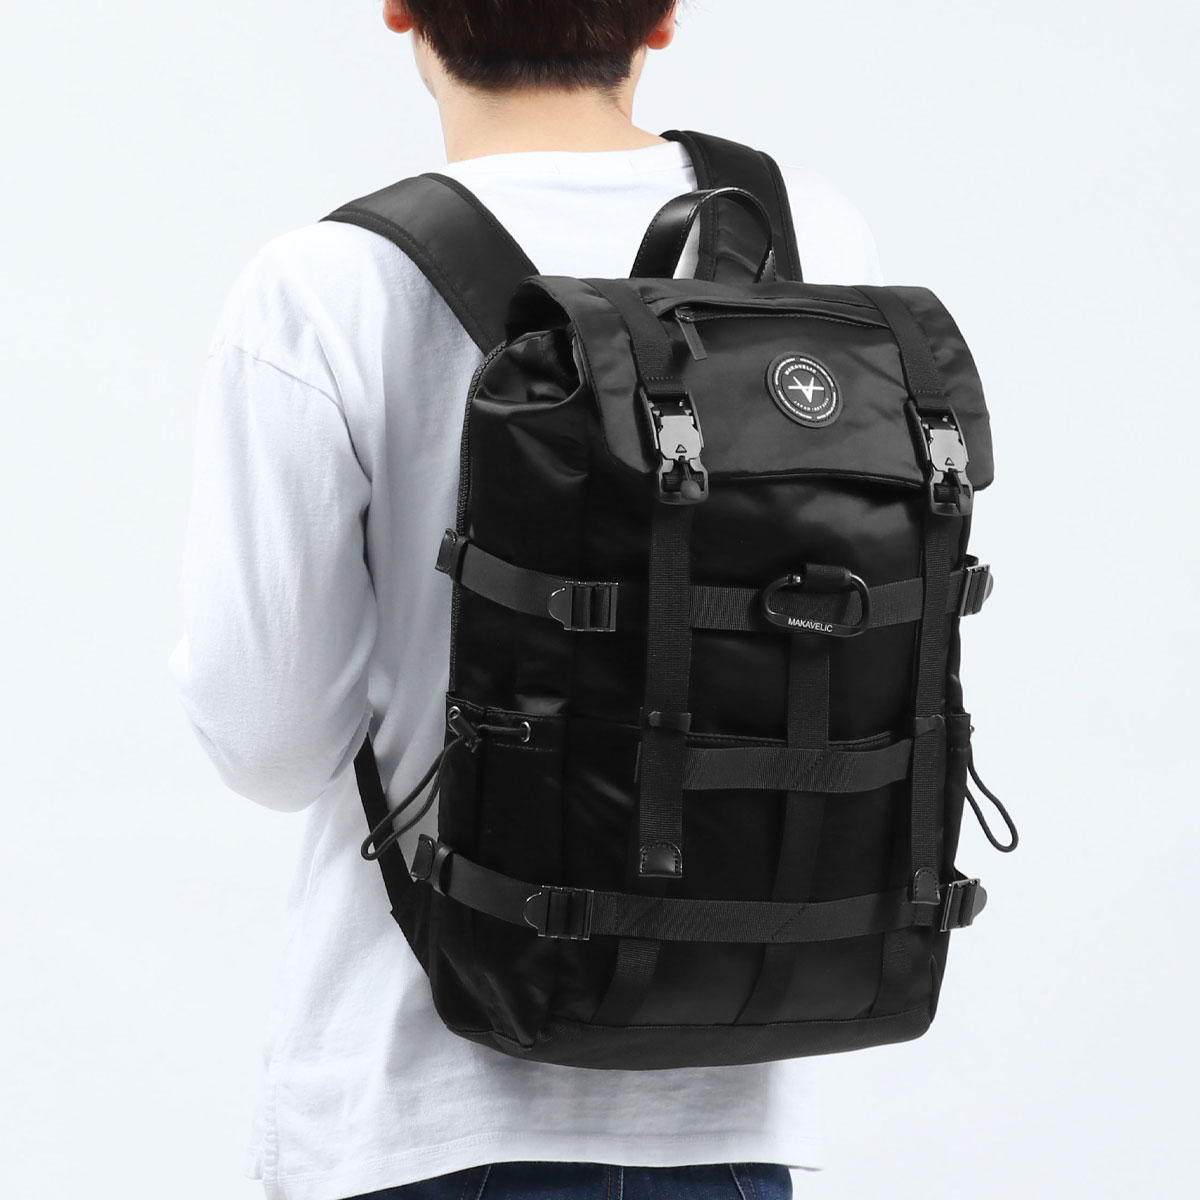 MAKAVELIC マキャベリック X-DESIGN LIMITED MESH WORK BACKPACK 3120-10114